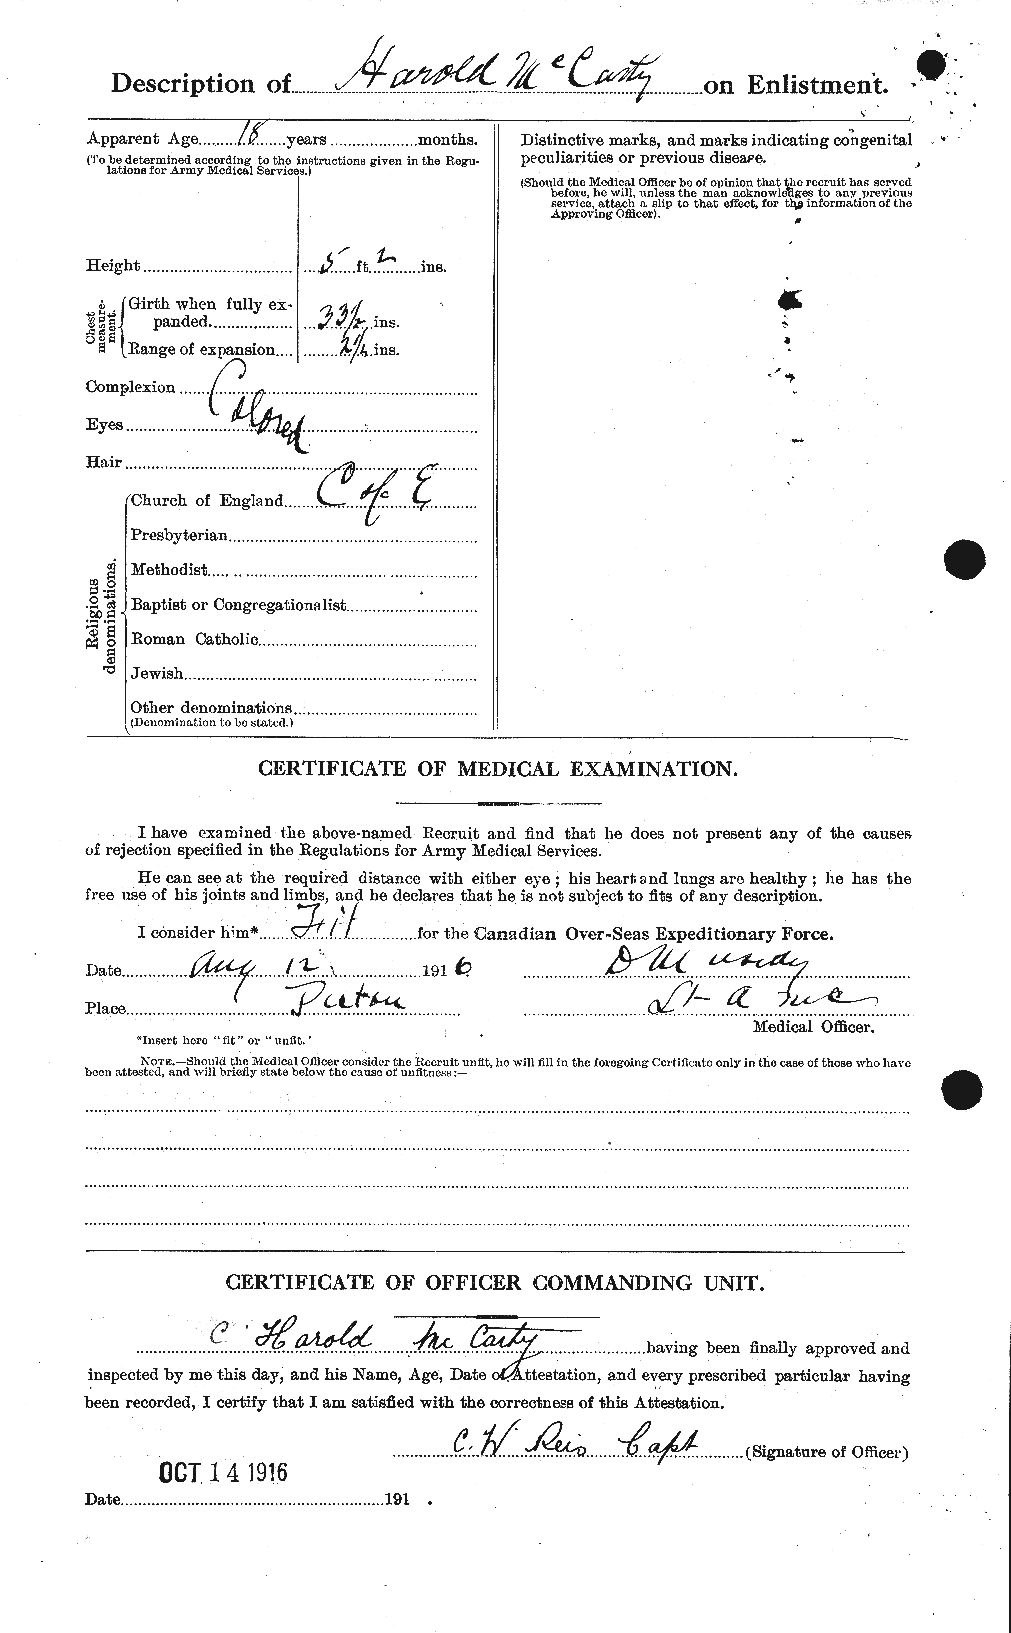 Personnel Records of the First World War - CEF 133501b